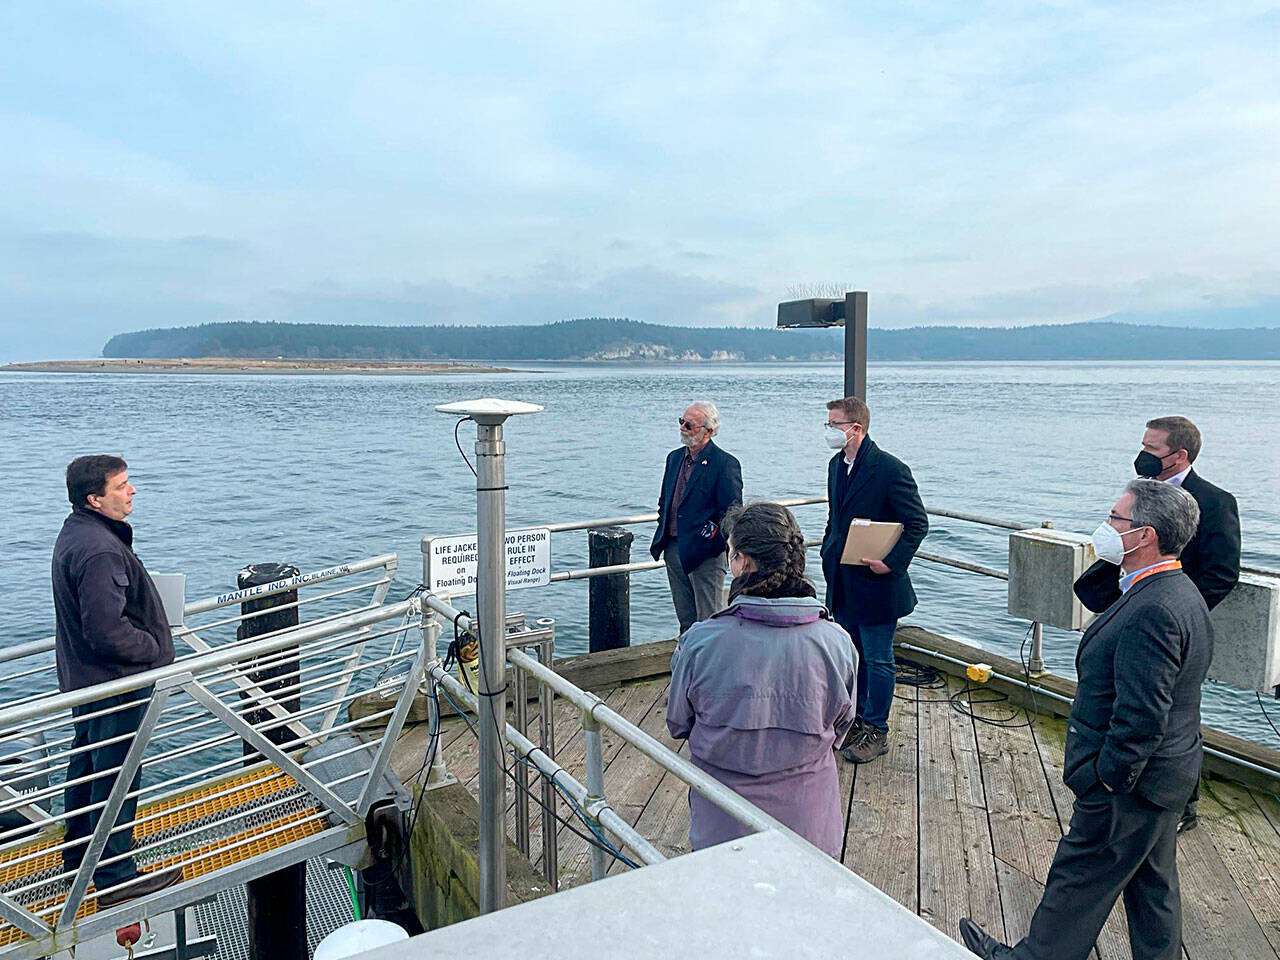 Pacific Northwest National Laboratory research scientist and dive officer John Vavrinec, left, shares details of PNNL’s work on Sequim Bay with U.S. Reps. Dan Newhouse and Derek Kilmer last week. (Photo courtesy Pacific Northwest National Laboratory)